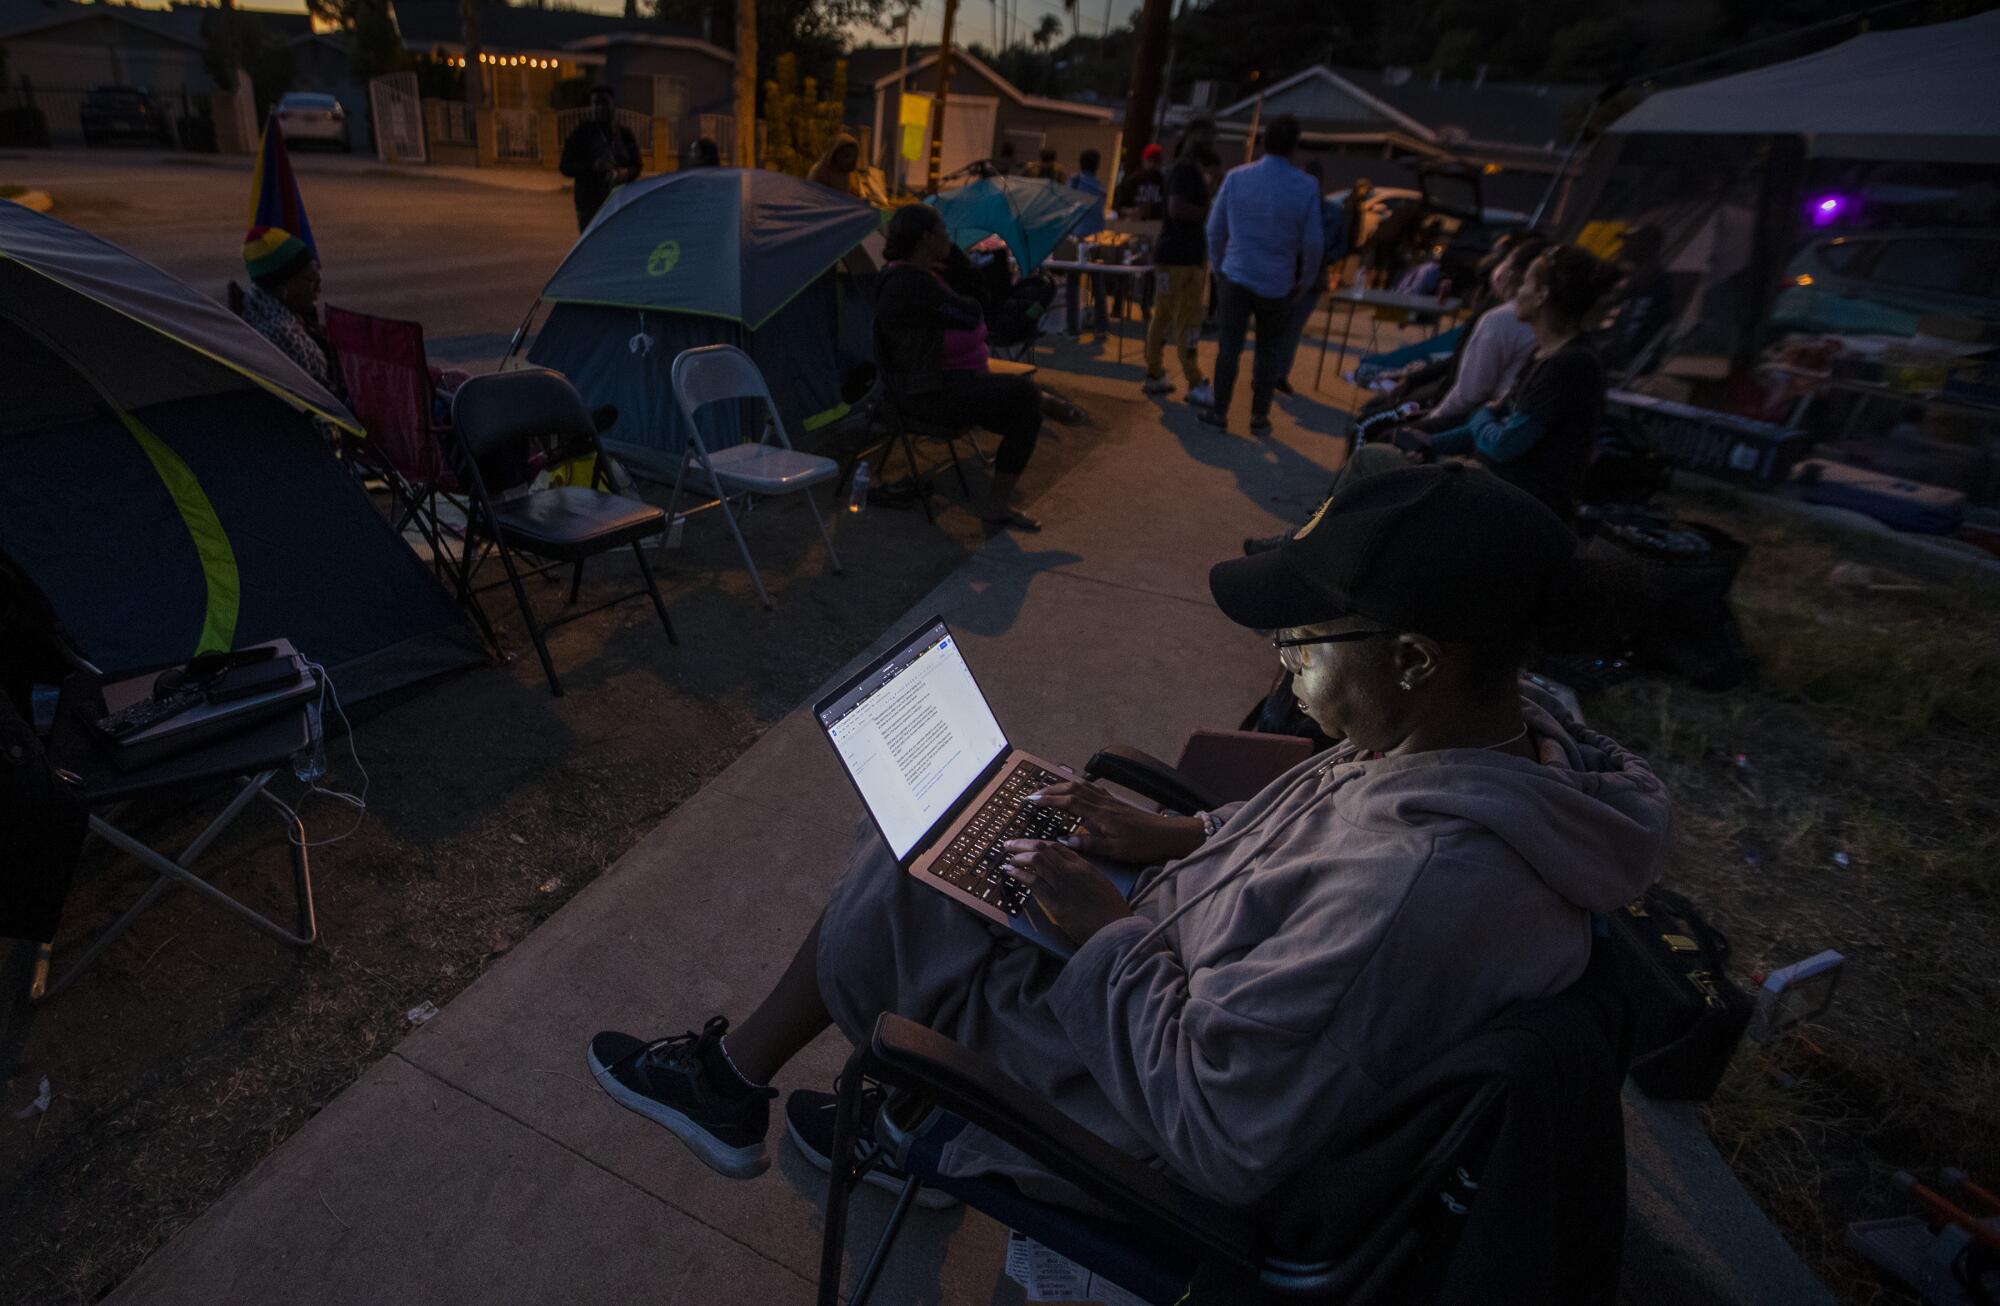 As evening falls, one activist works on her laptop as others gather outside tents.